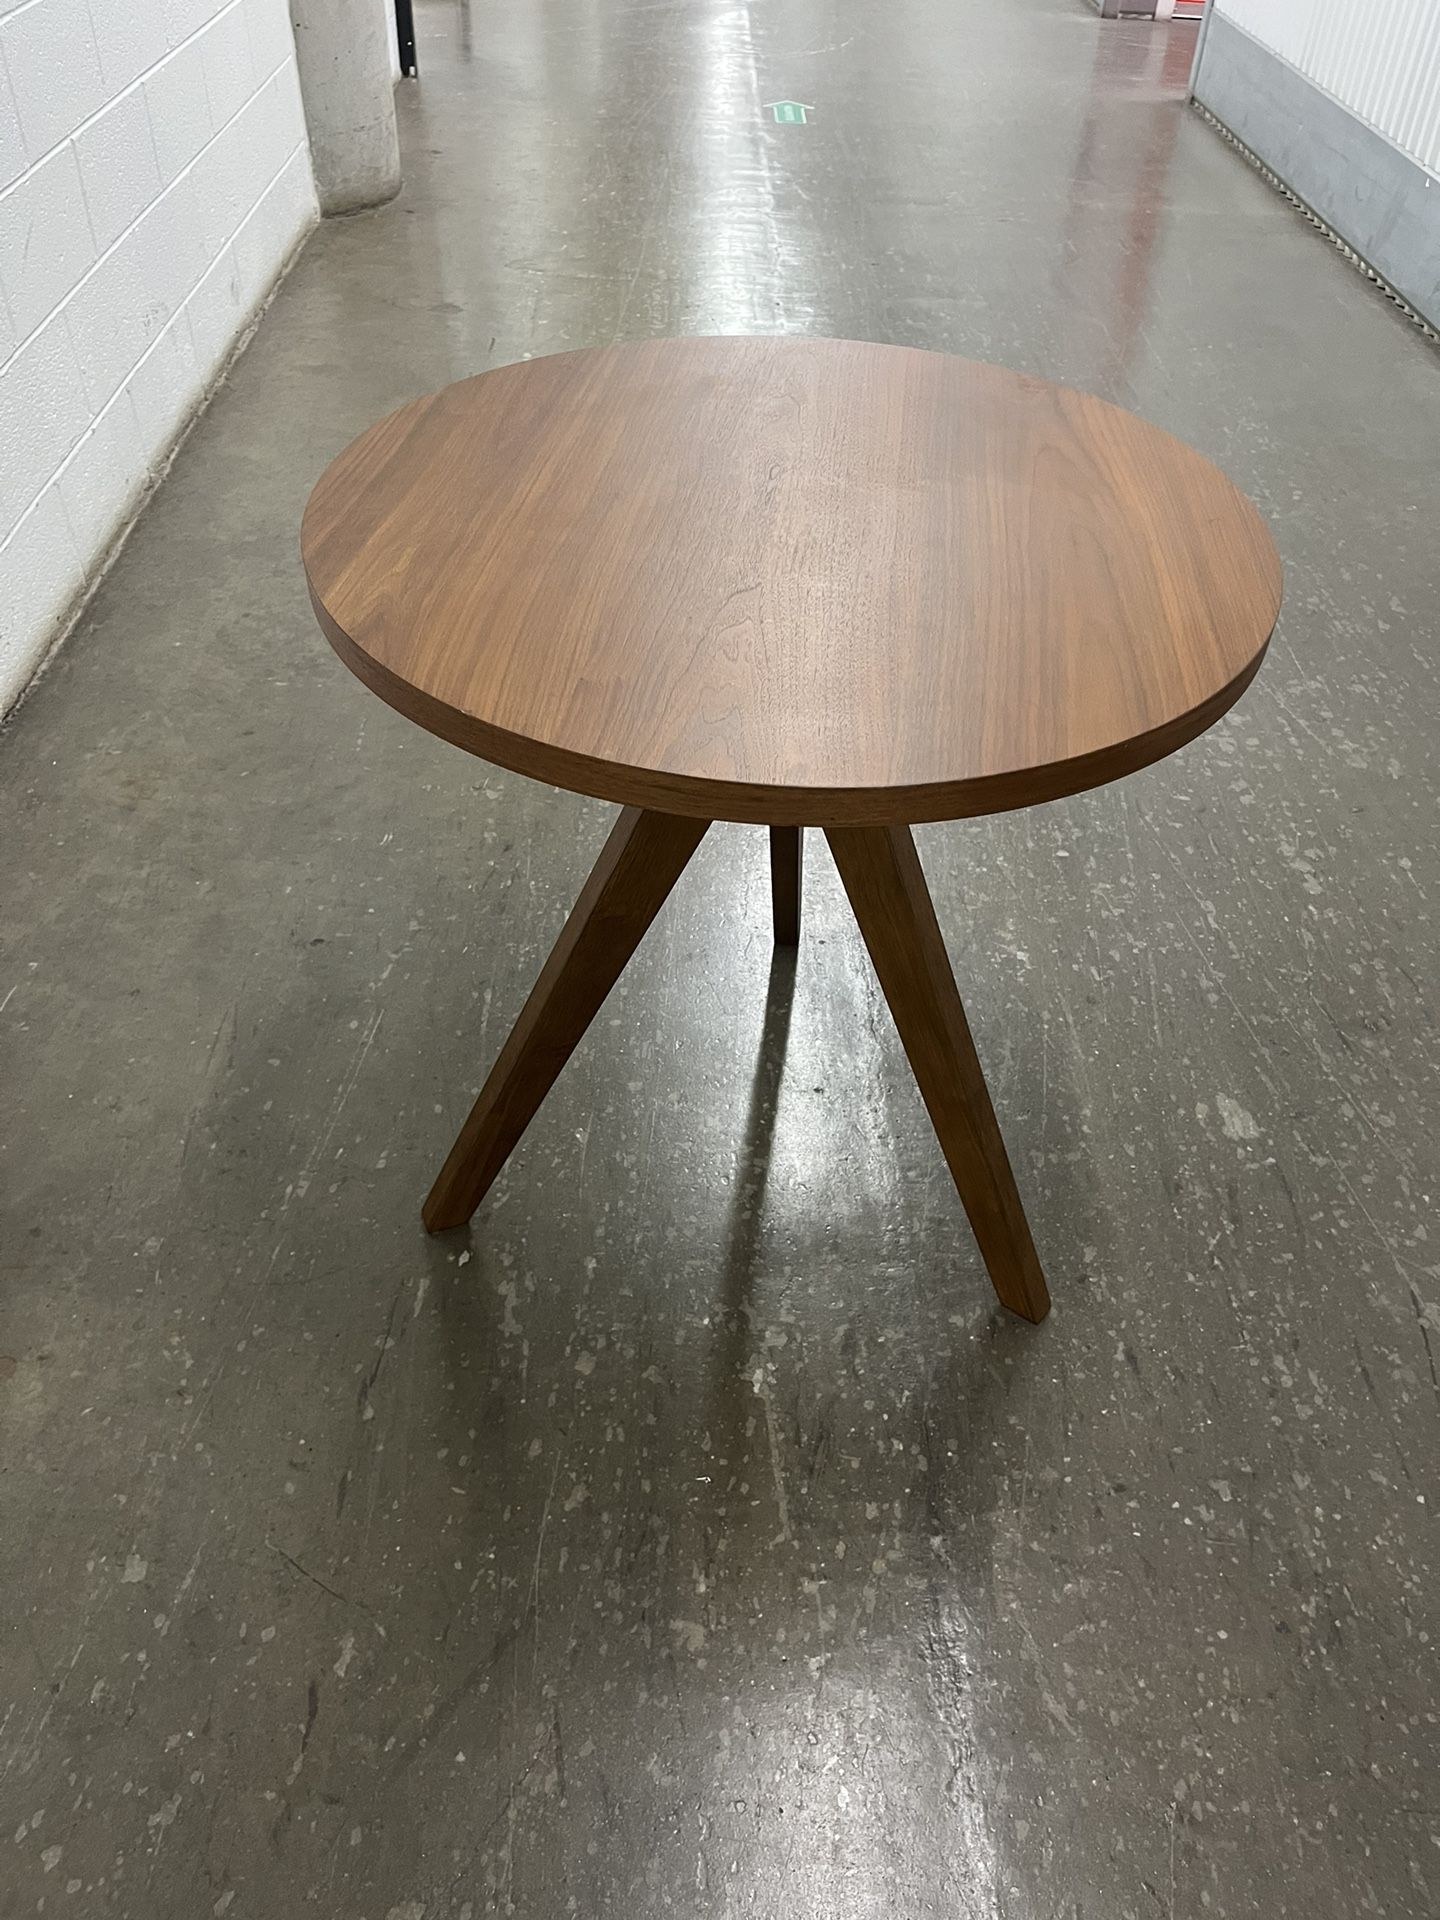 West Elm Tripod Dining Table